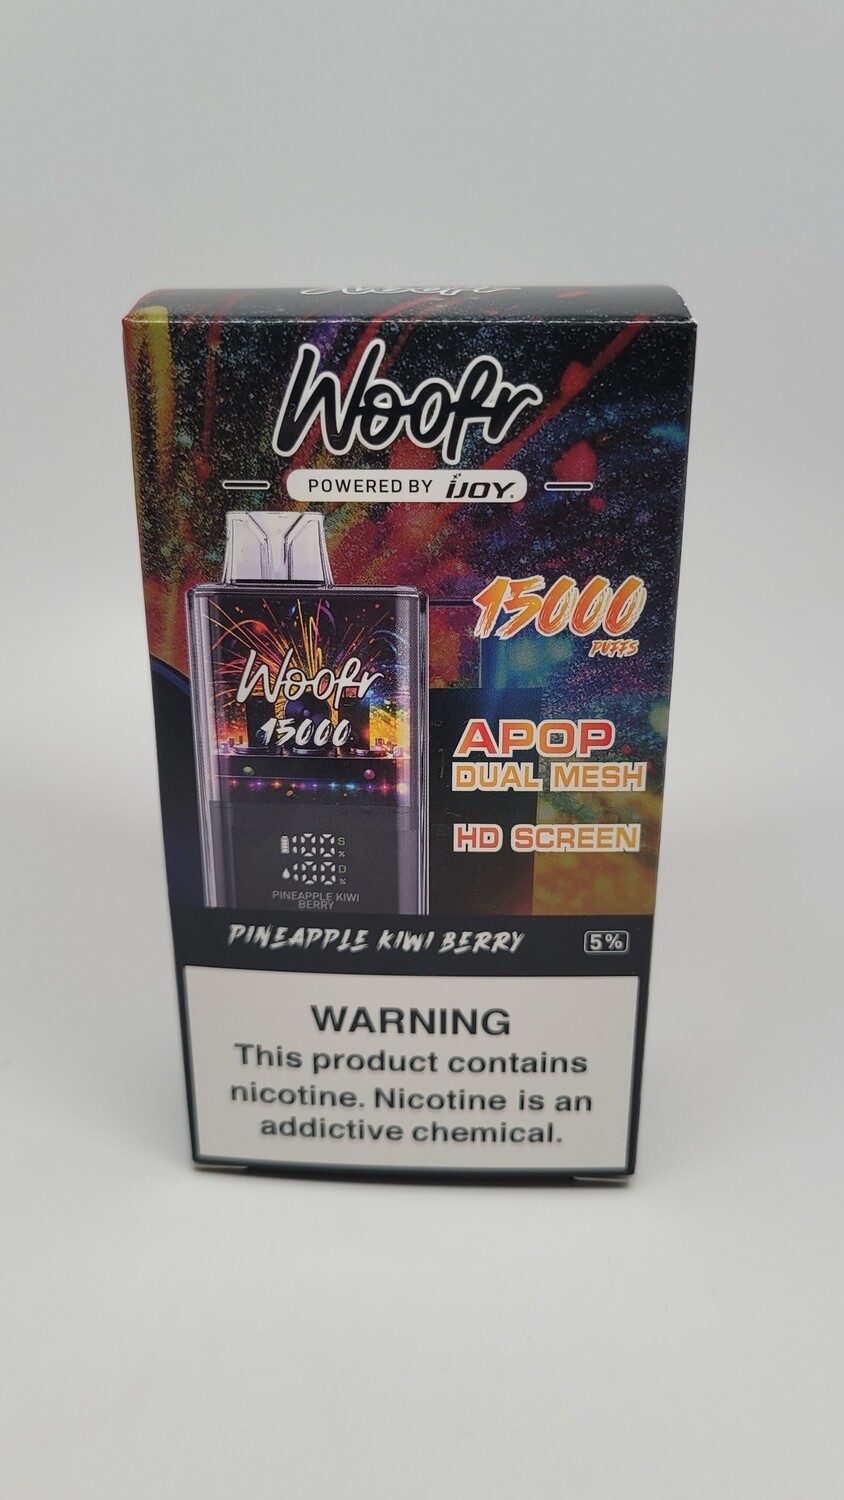 Woofr 15000 Disposable Pineapple Kiwi Berry